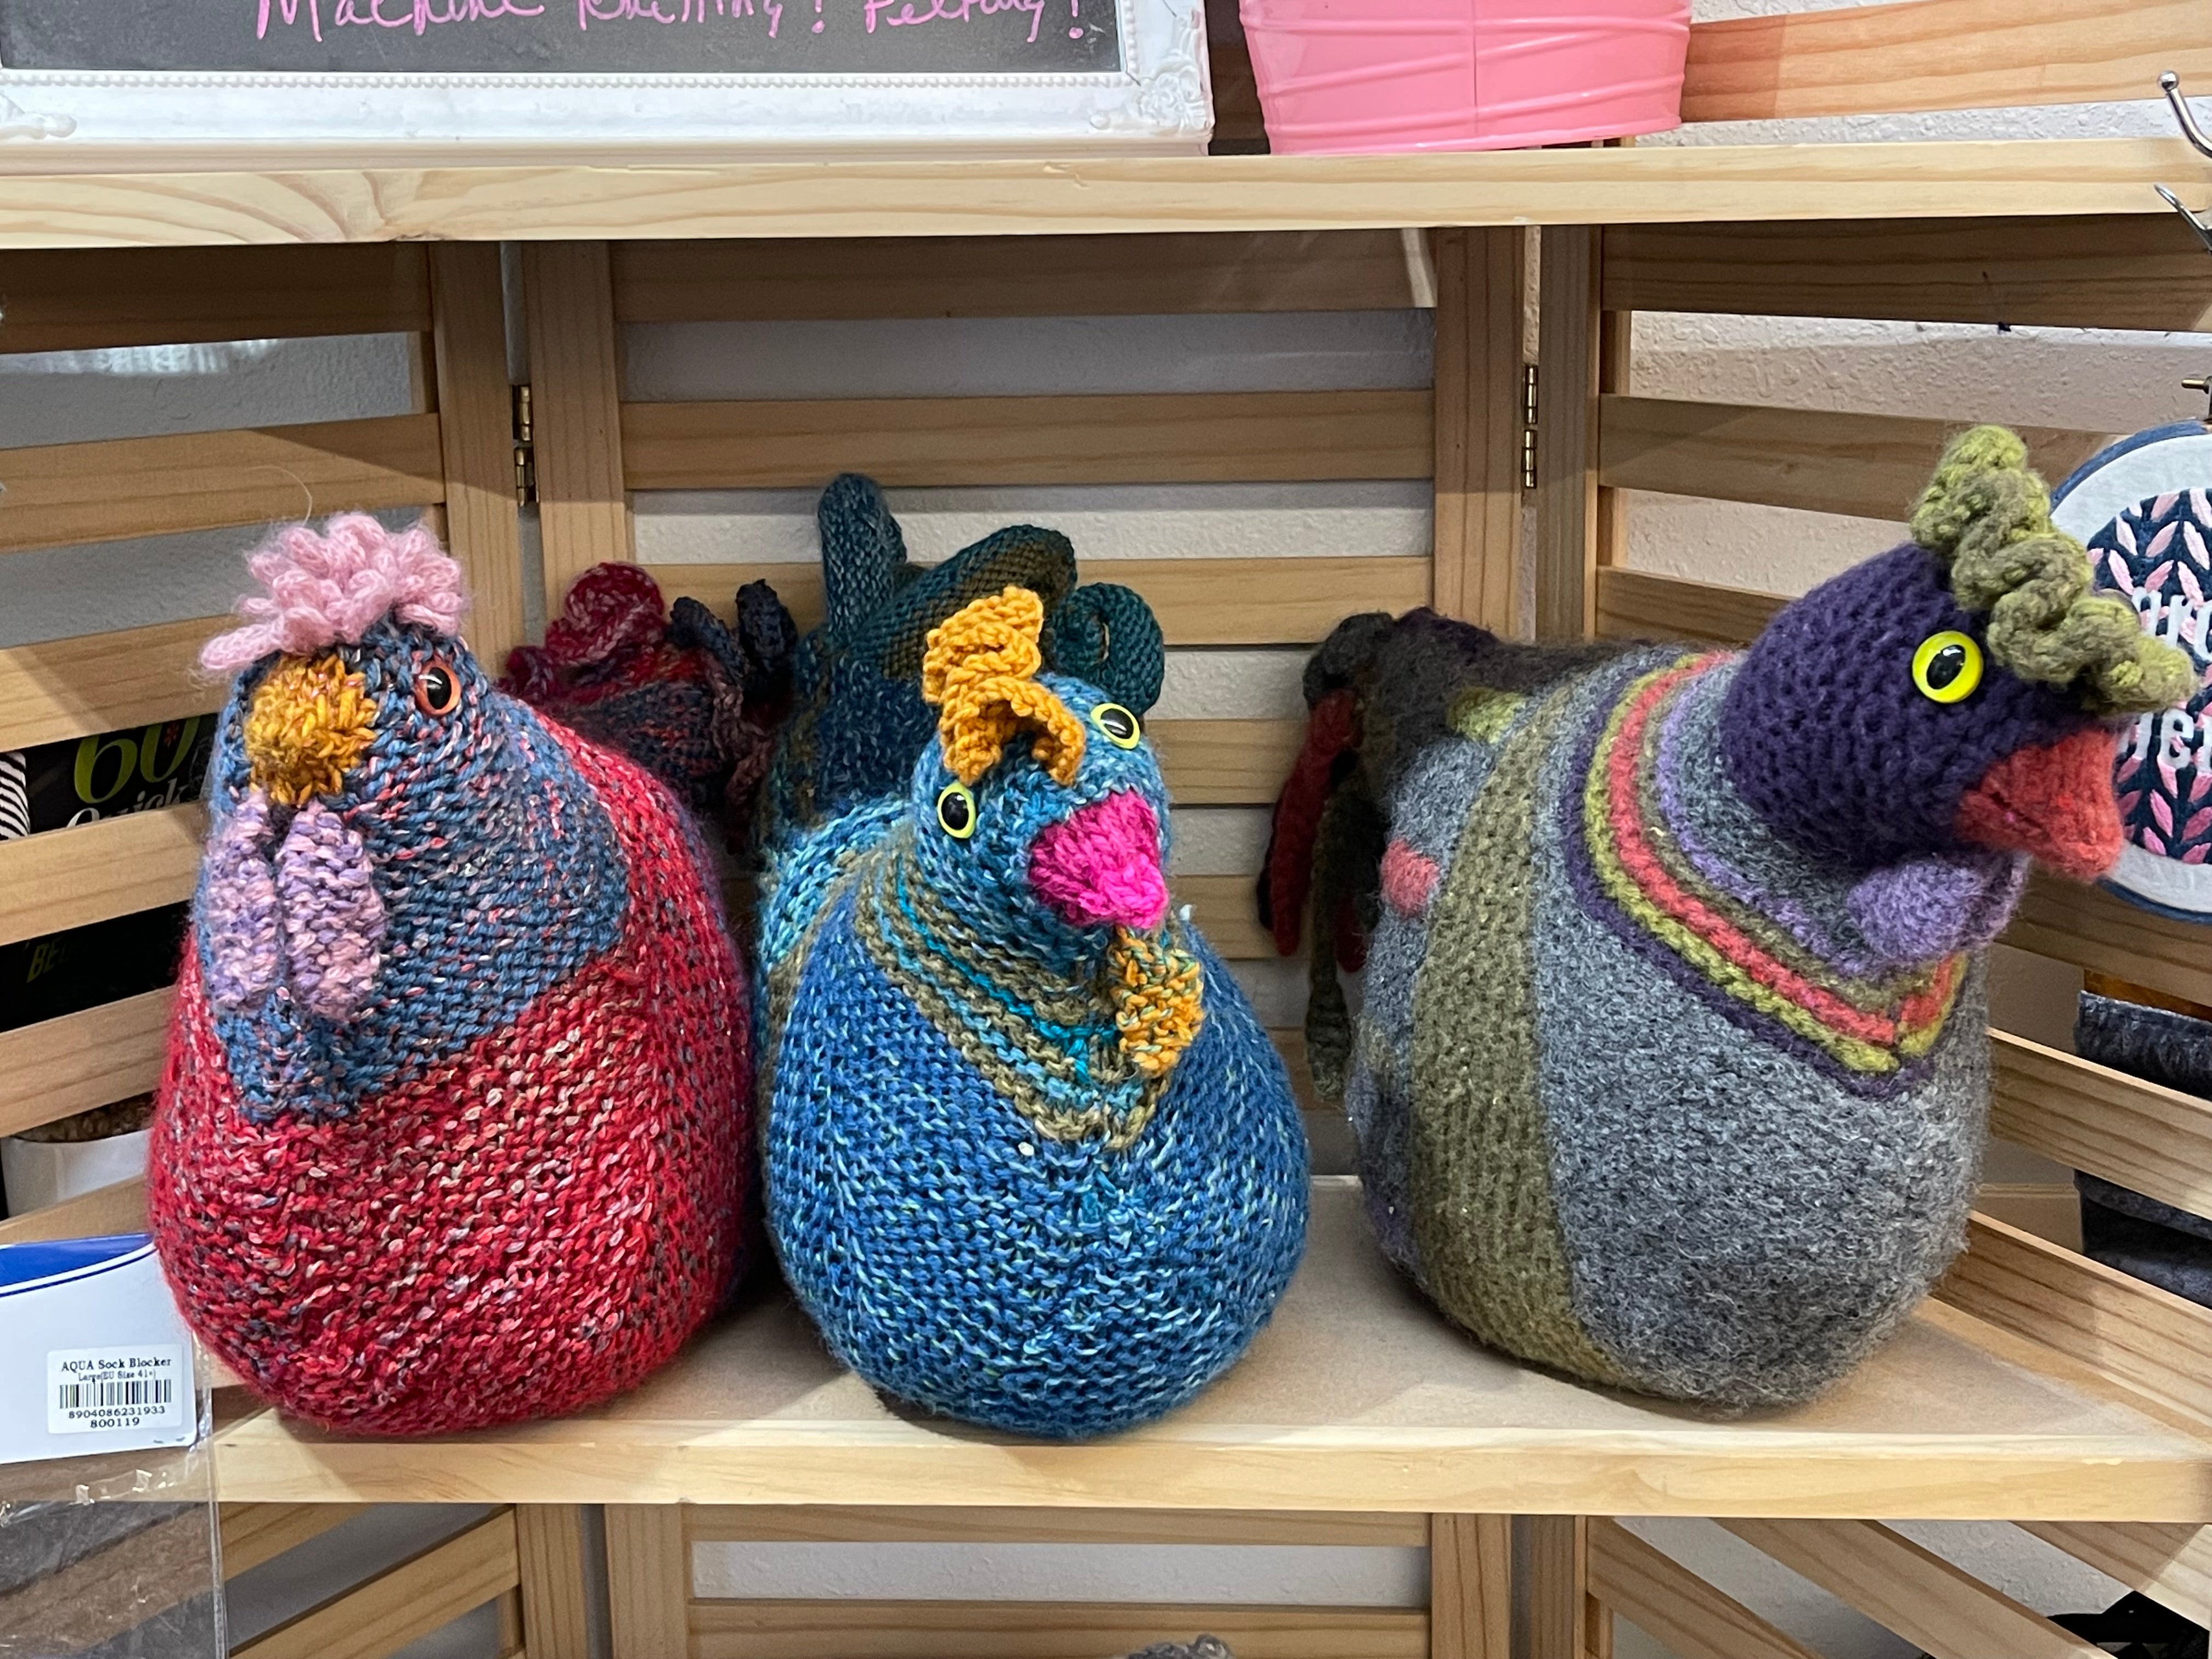 Make an Emotional Support Chicken Class – The Knitting Tree, L.A.